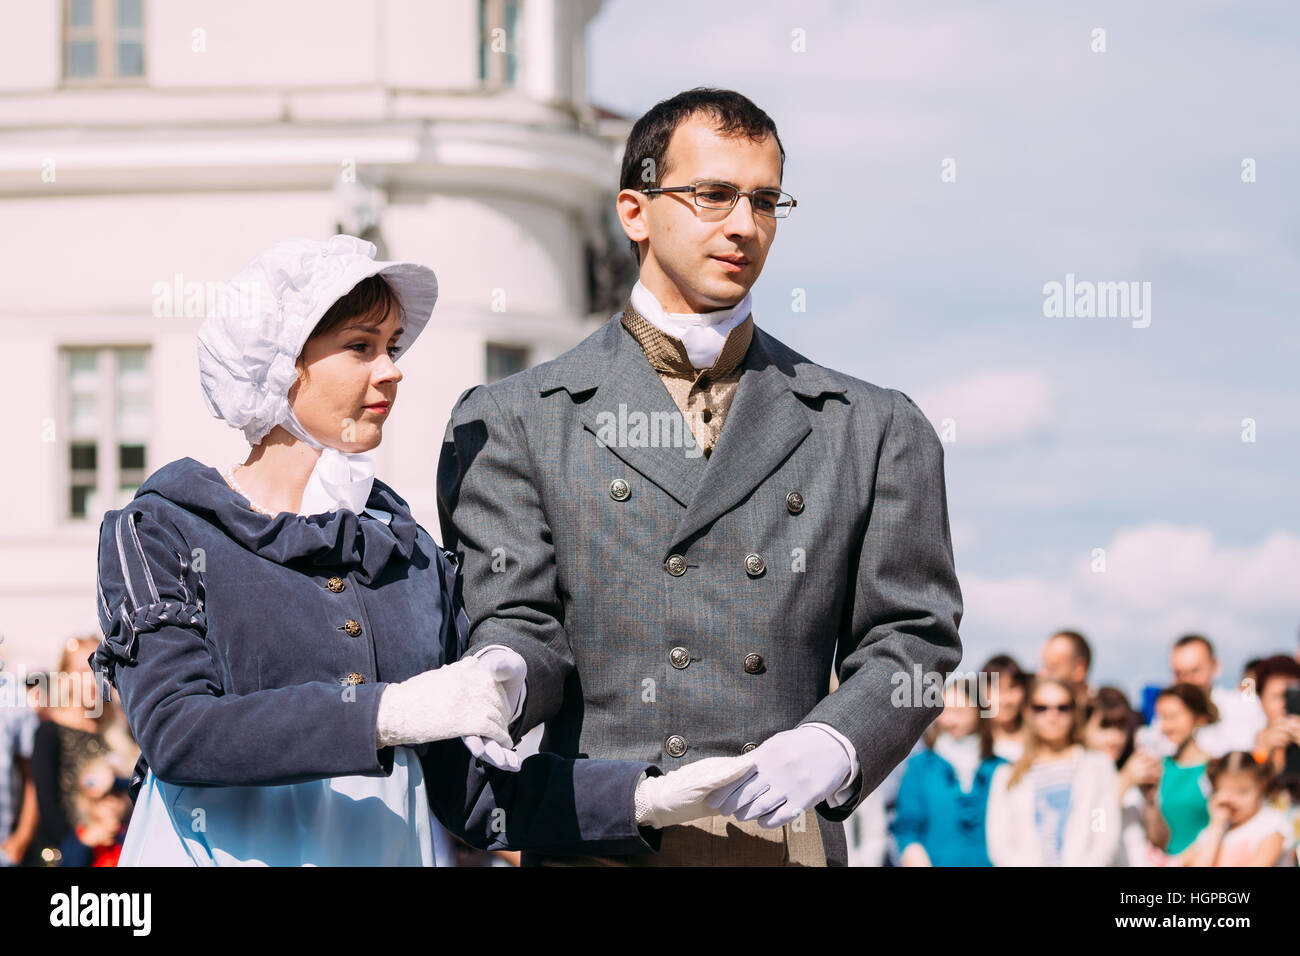 Minsk, Belarus - September 3, 2016: Couple of young people dressed in clothes of the 19th century dancing Polonaise at the celebration of the Day of M Stock Photo